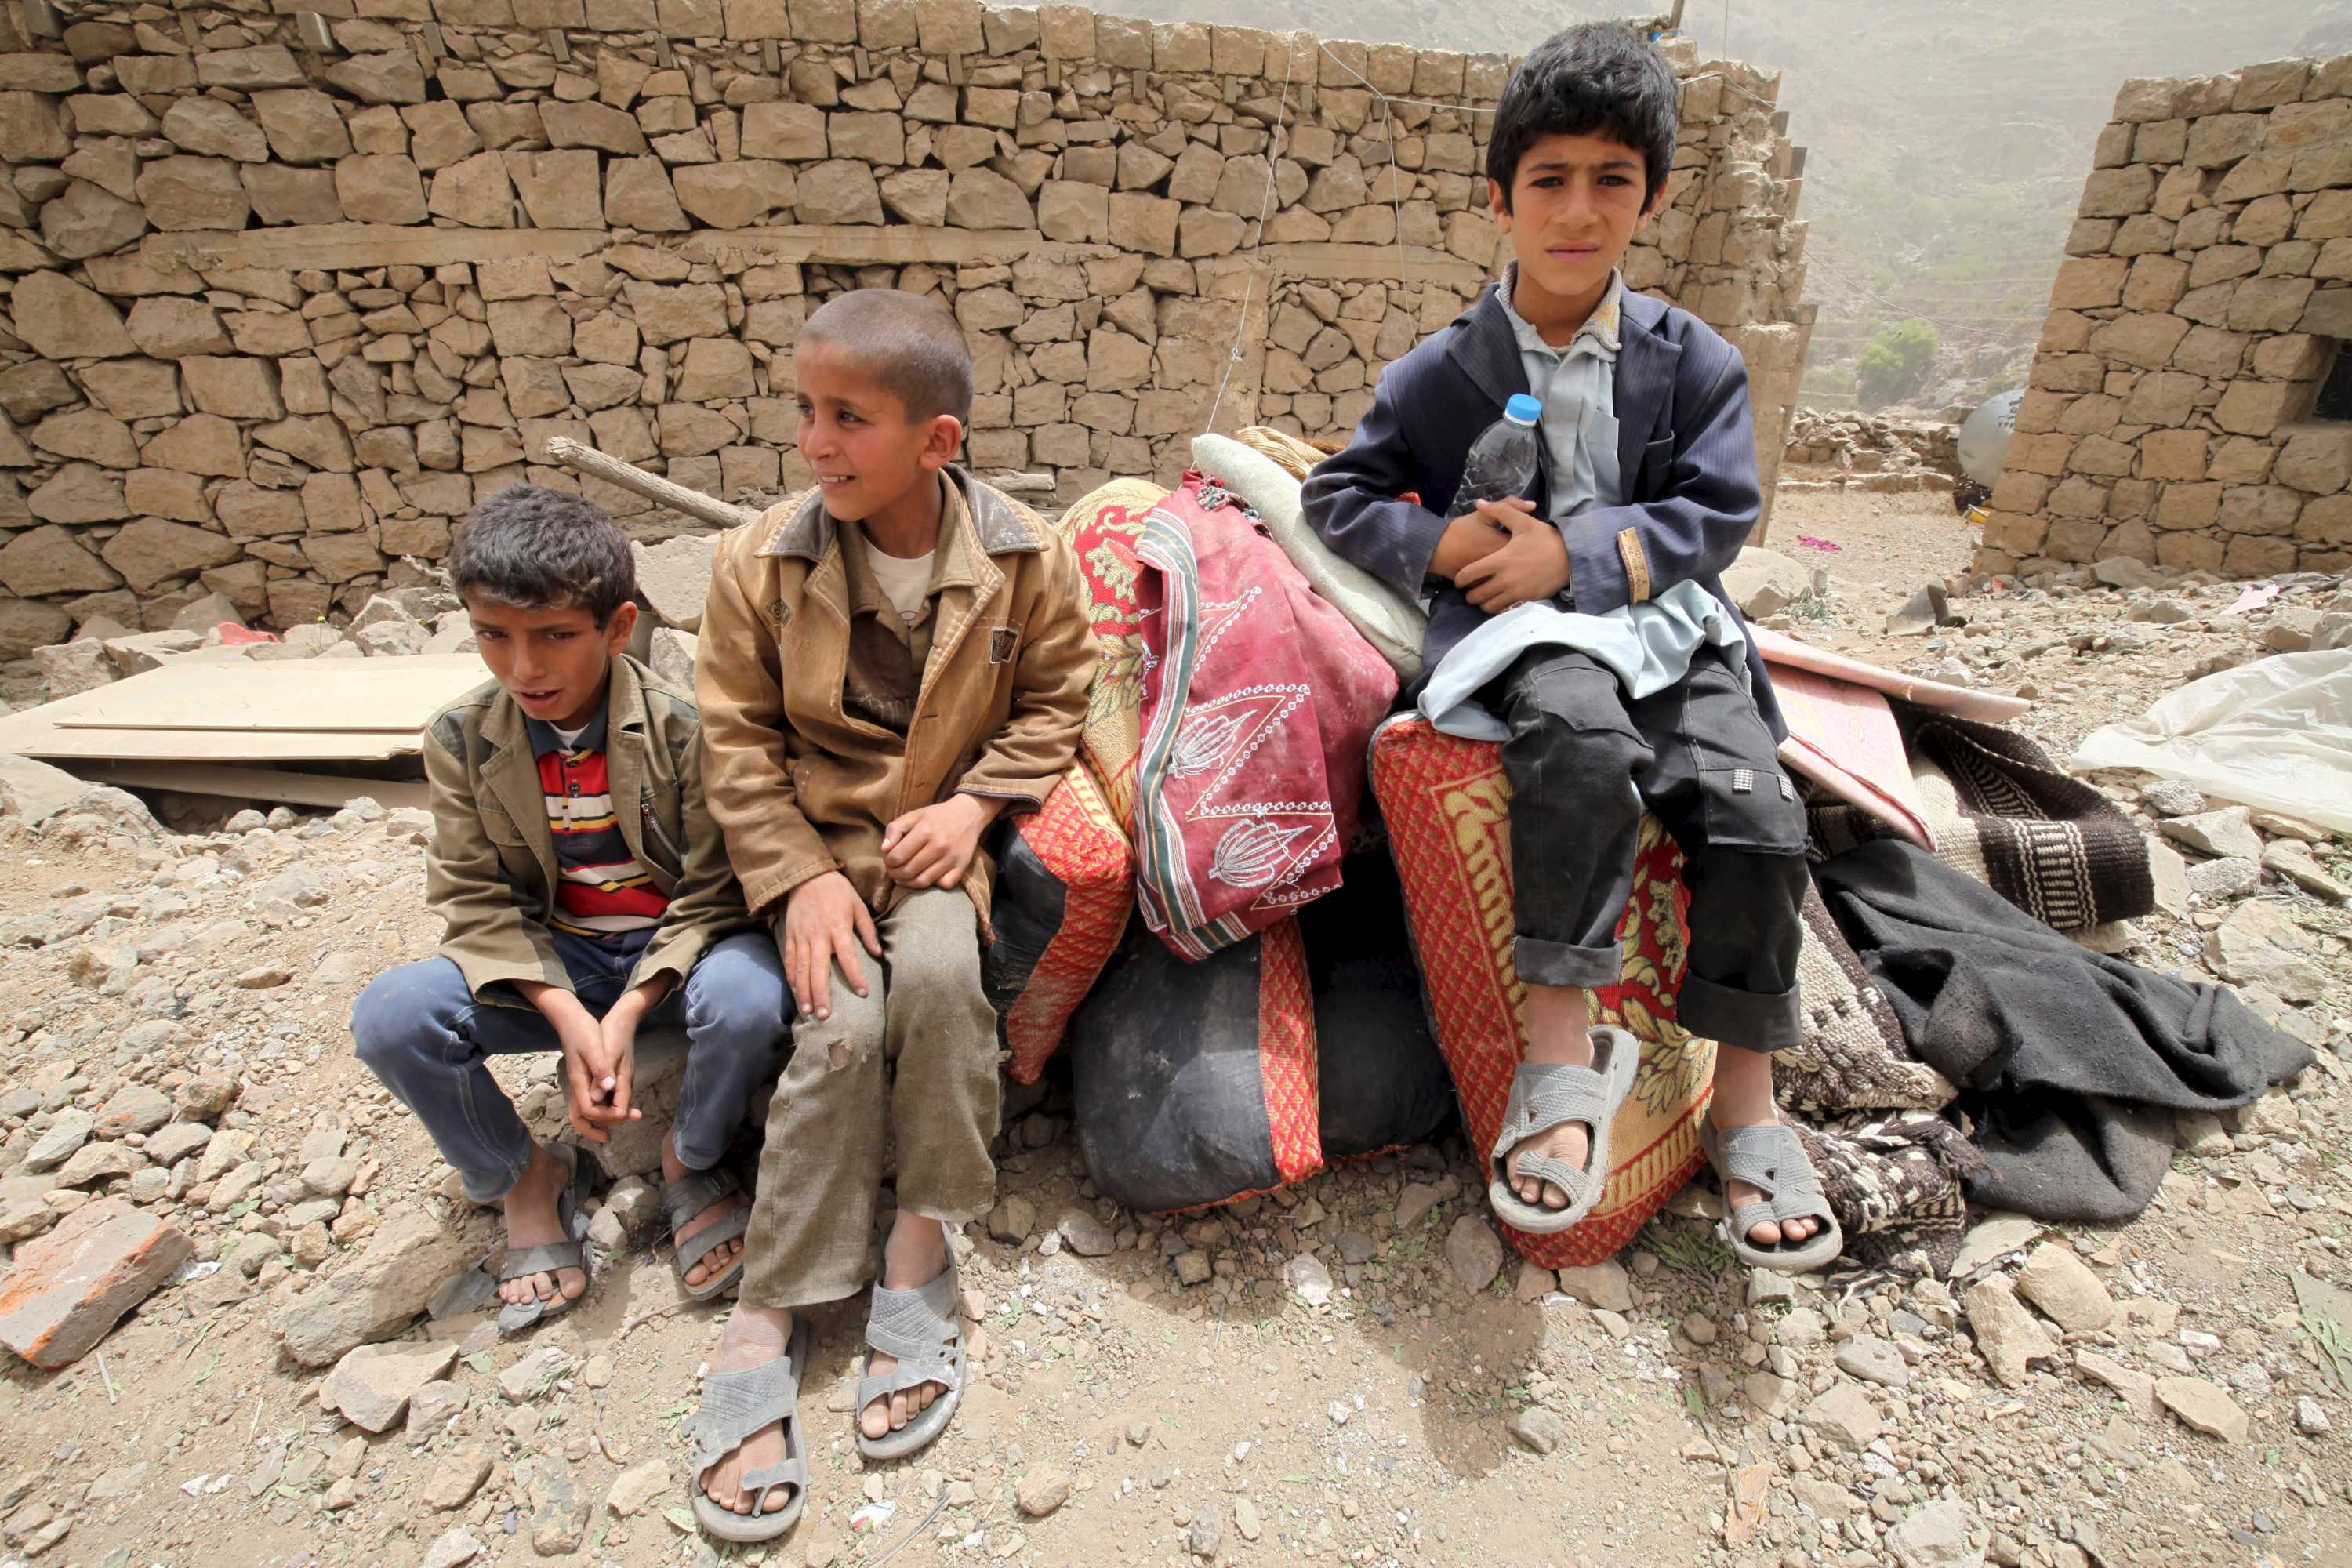 Boys sit among rubble of houses destroyed in air strike